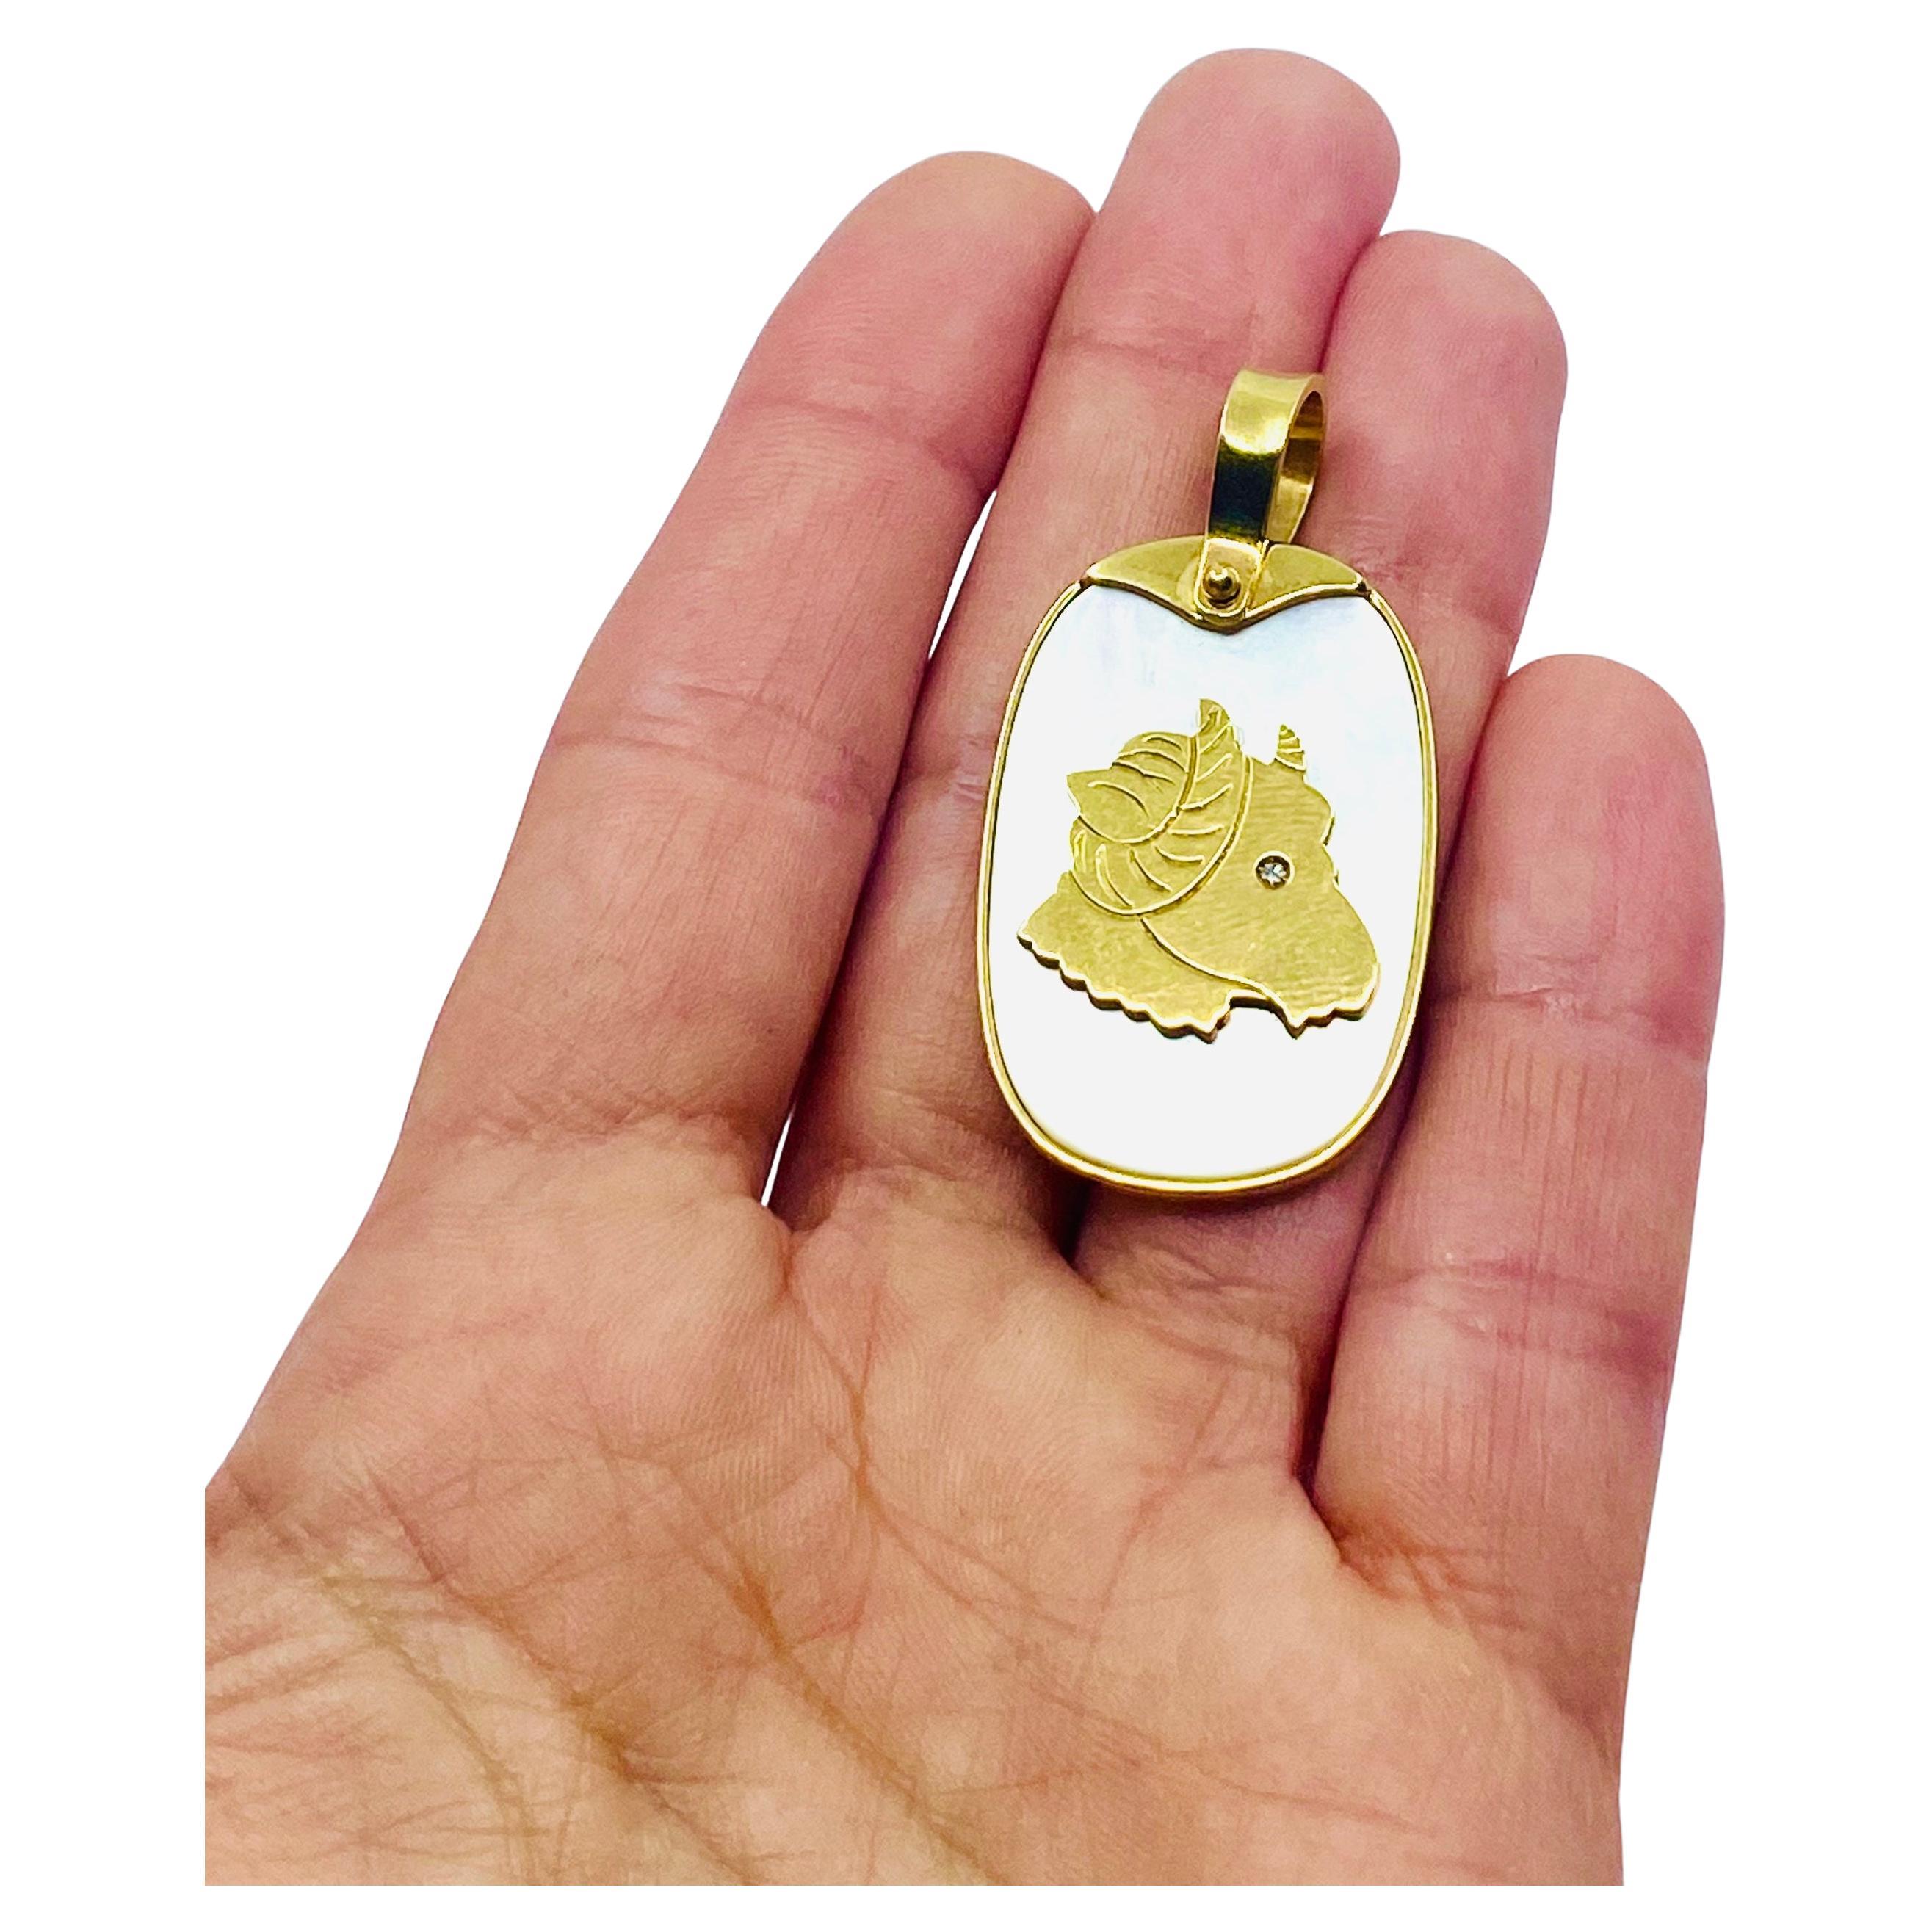 

CIRCA: 1990’s
MATERIALS: 18K Yellow Gold 
GEMSTONE: Diamond, Mother of Pearl
WEIGHT: 14.1 grams
MEASUREMENTS: 1 7/16” x 7/8”

An amazing Taurus charm pendant made of 18k gold and mother of pearl, features diamond. This gold Zodiac pendant is